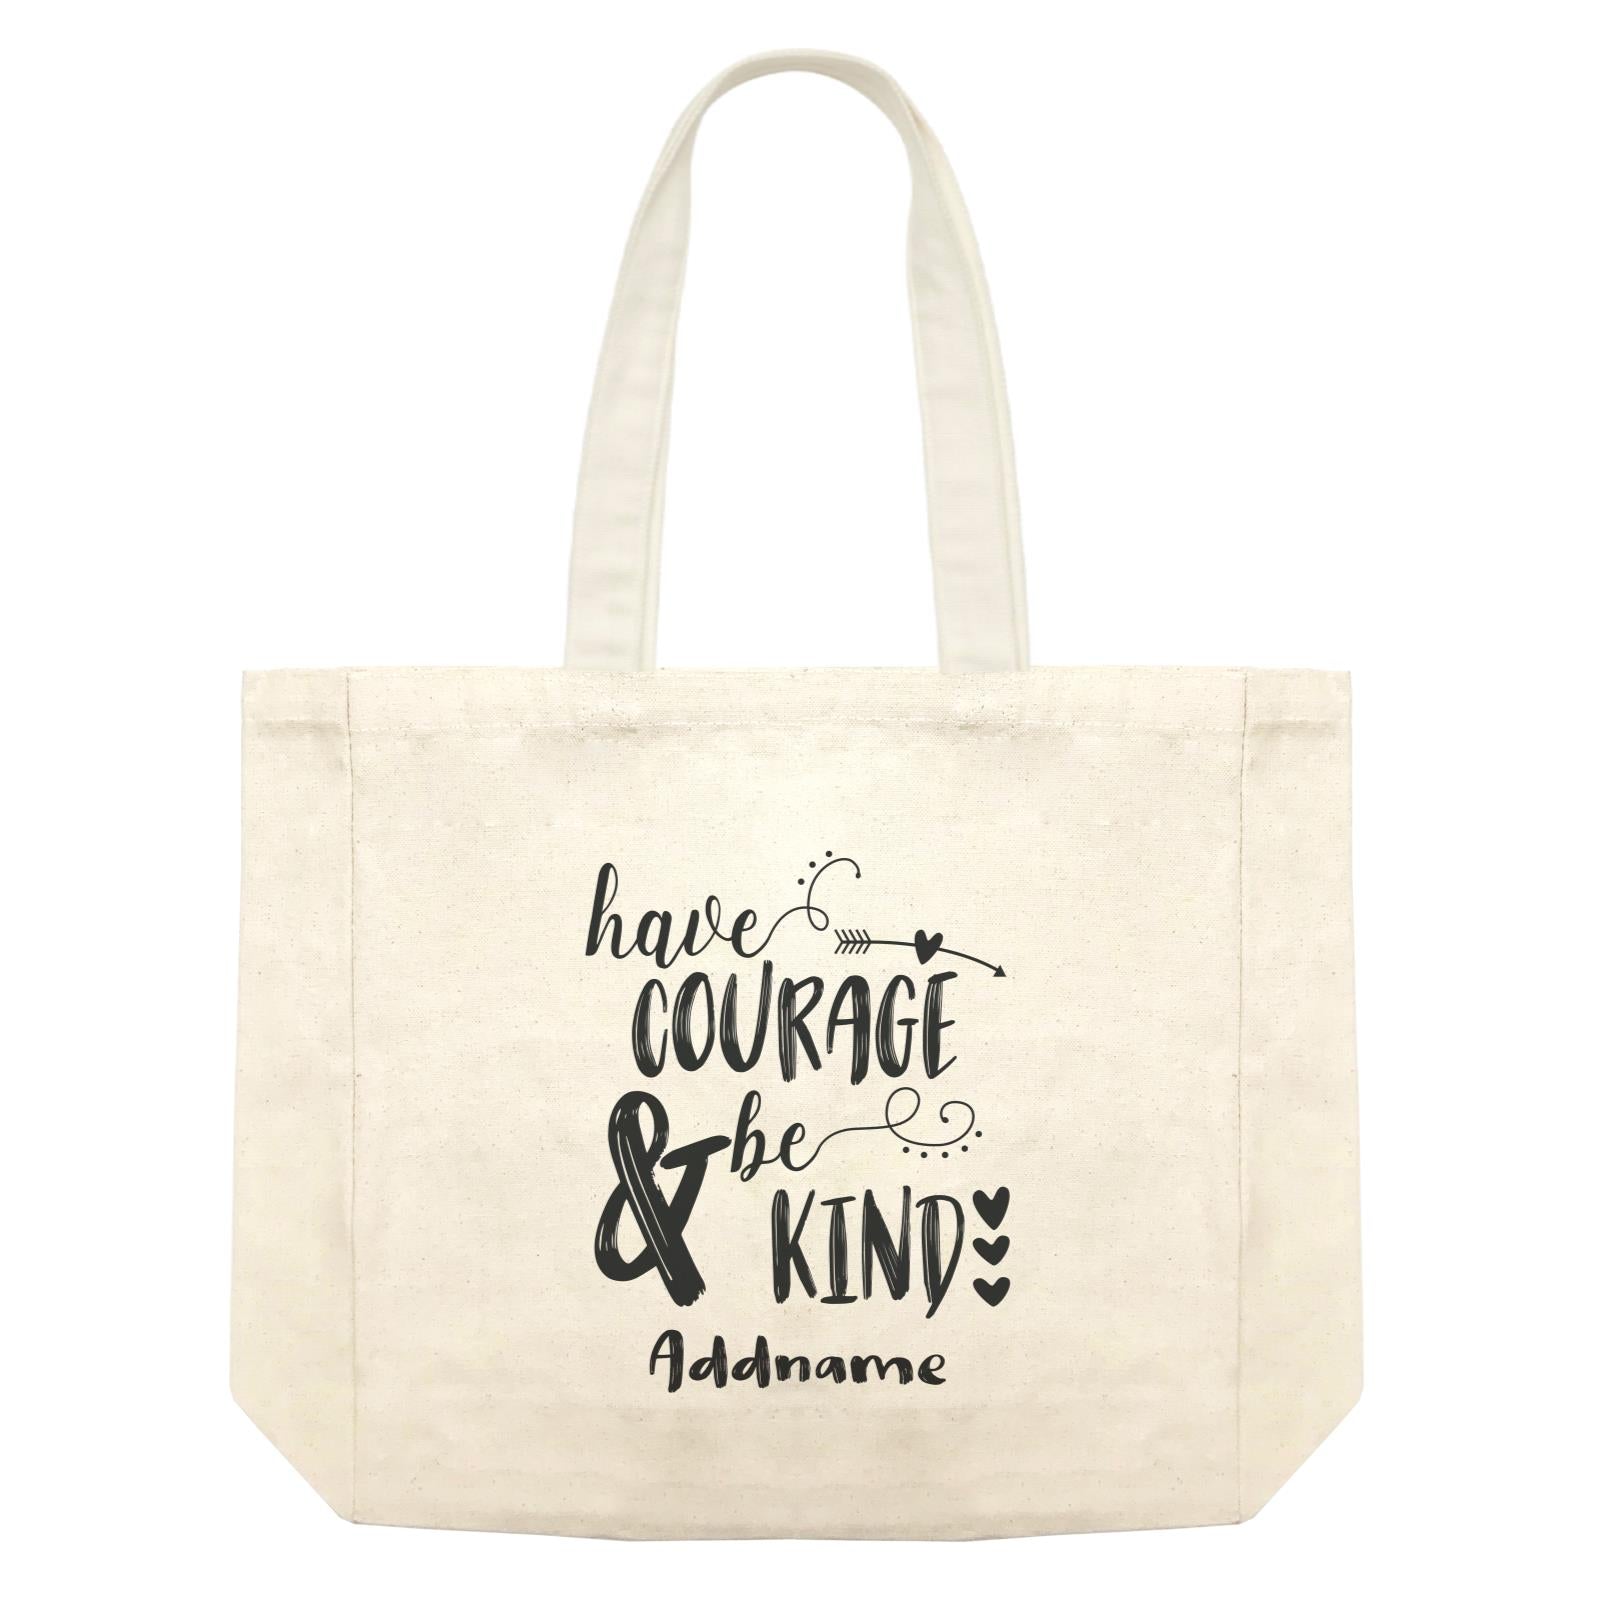 Inspiration Quotes Have Courage And Be Kind Addname Shopping Bag